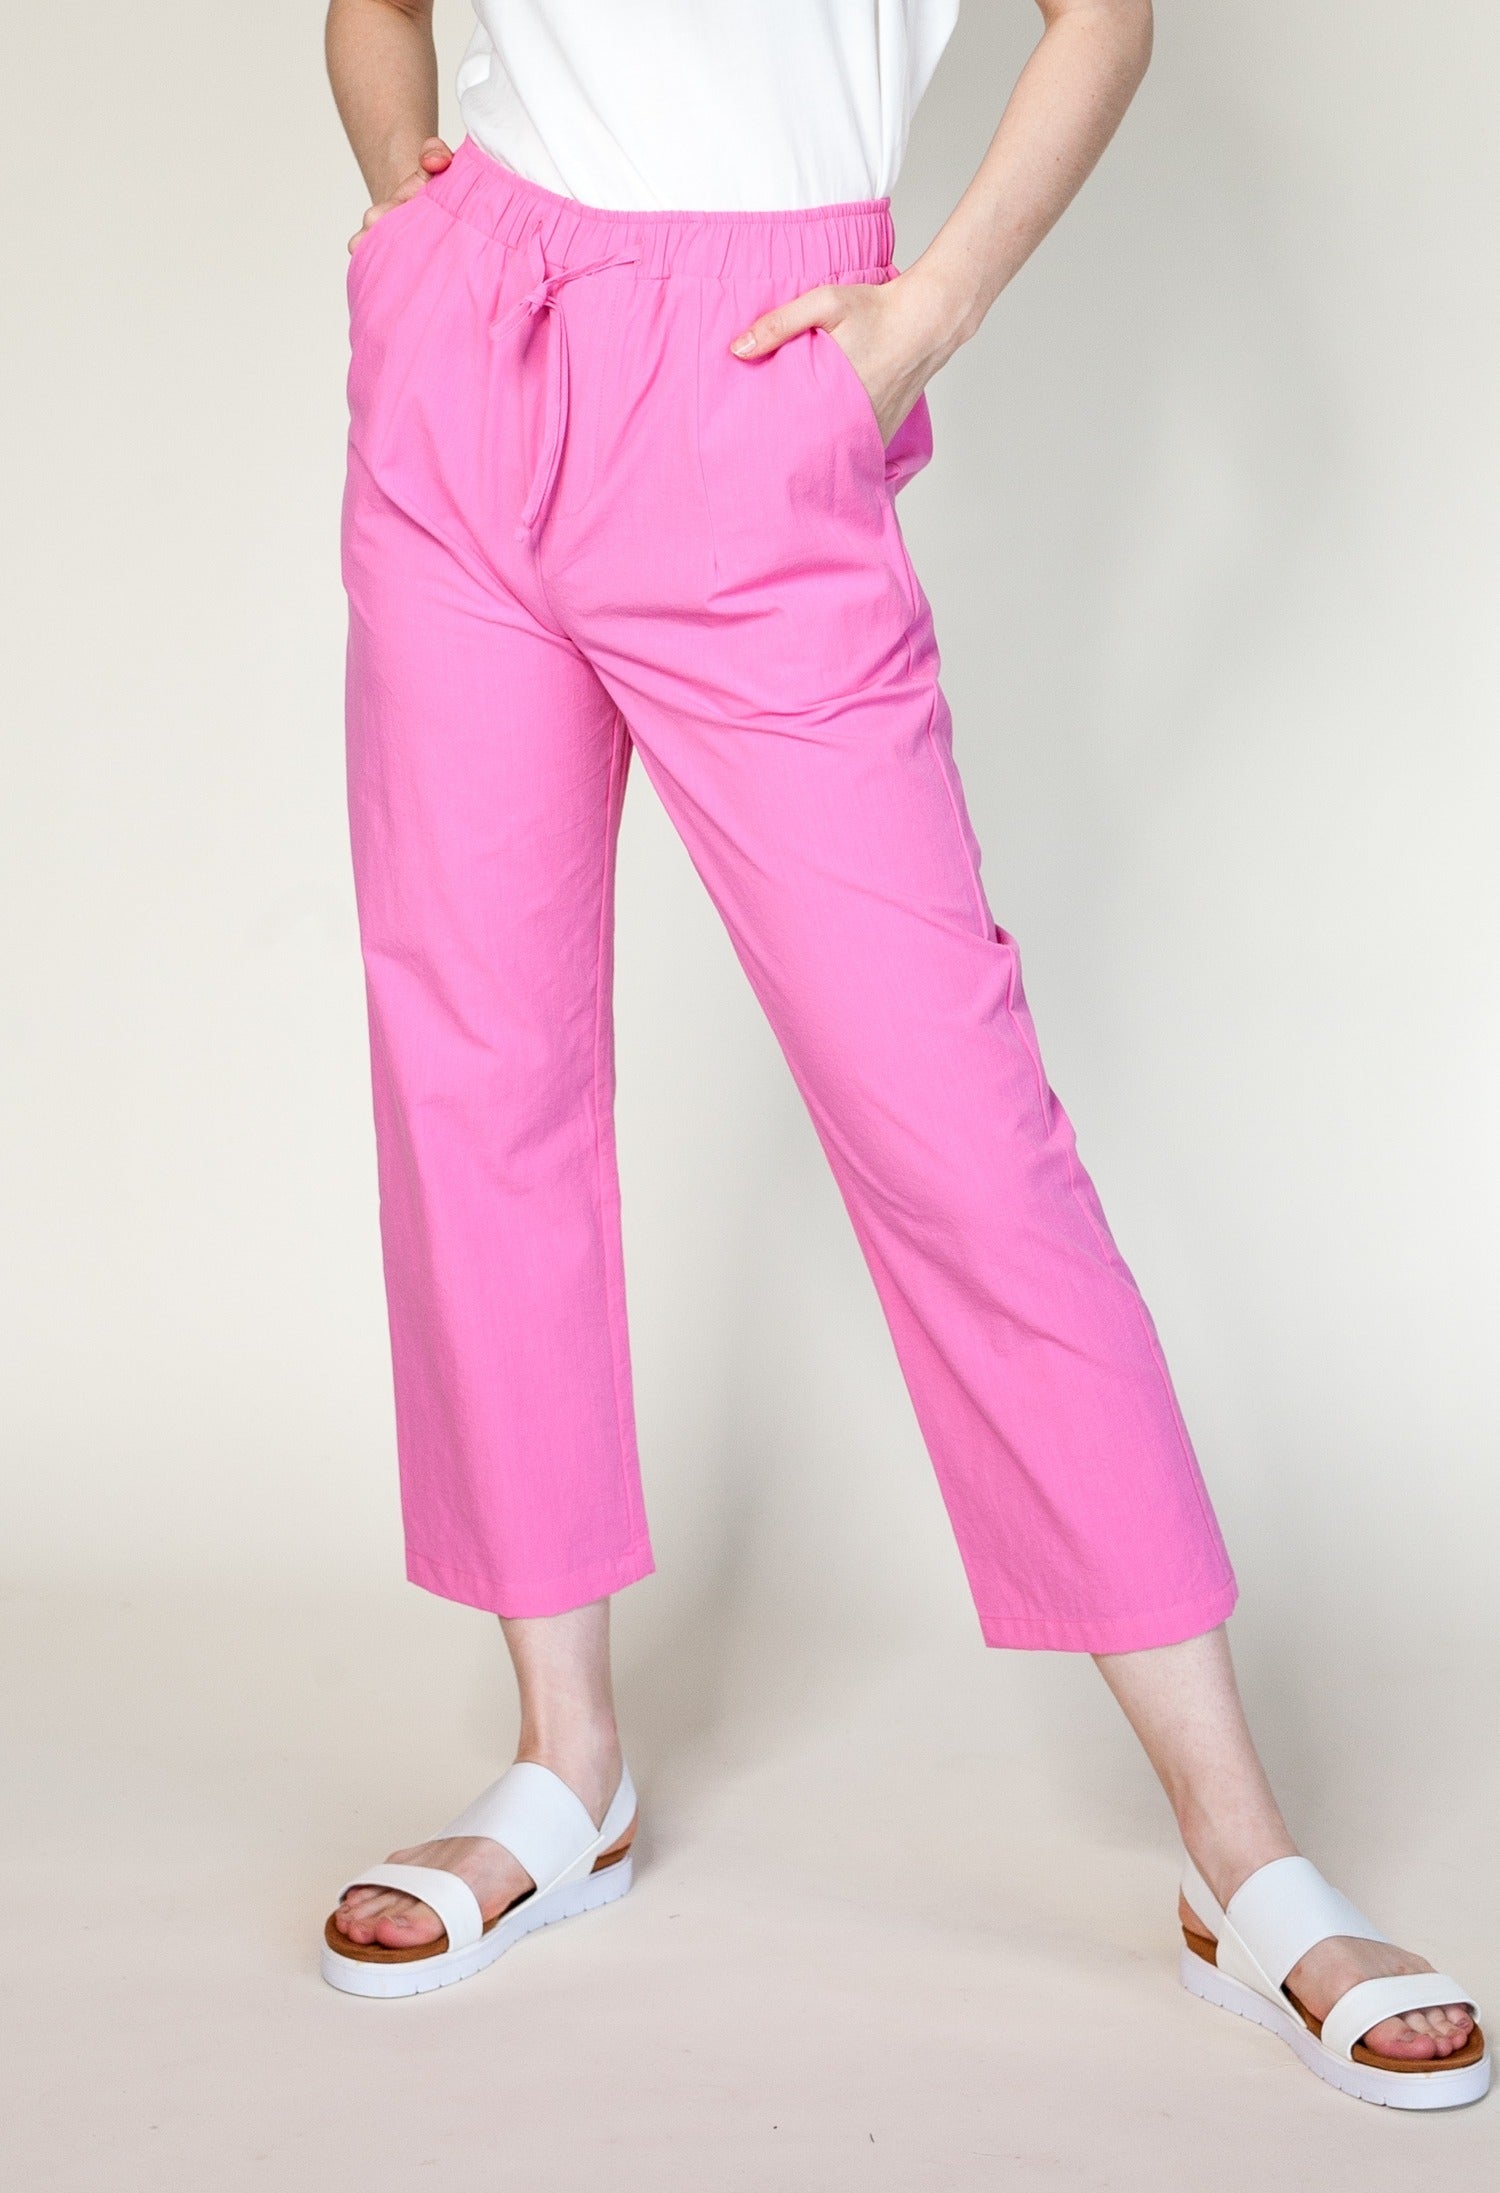 Domingo Pants Pink - Pink Martini Collection